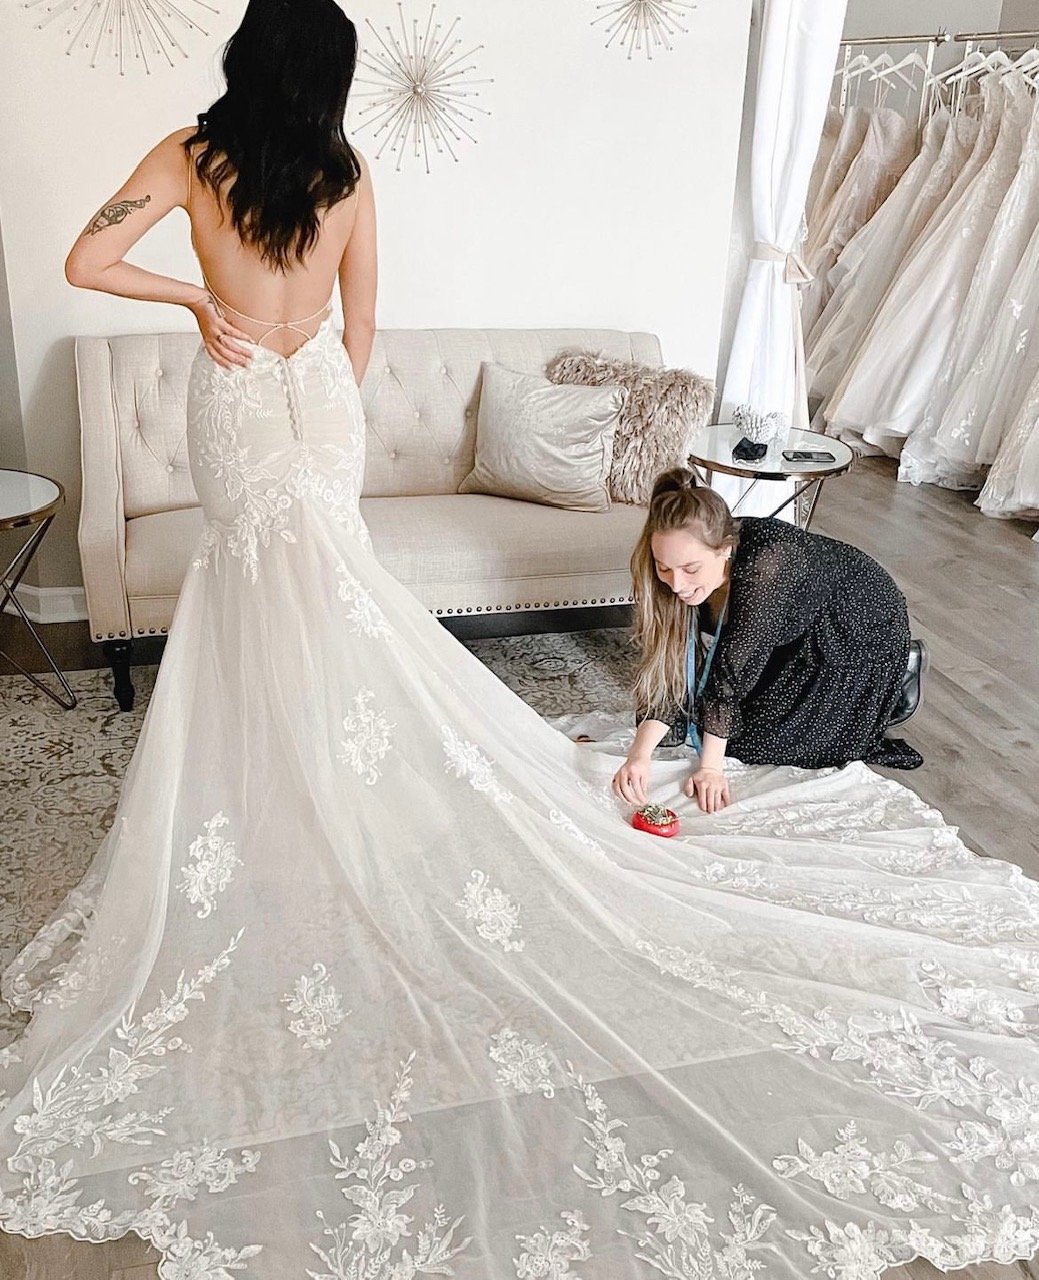 Is $1,200 too much for alterations? : r/weddingdress